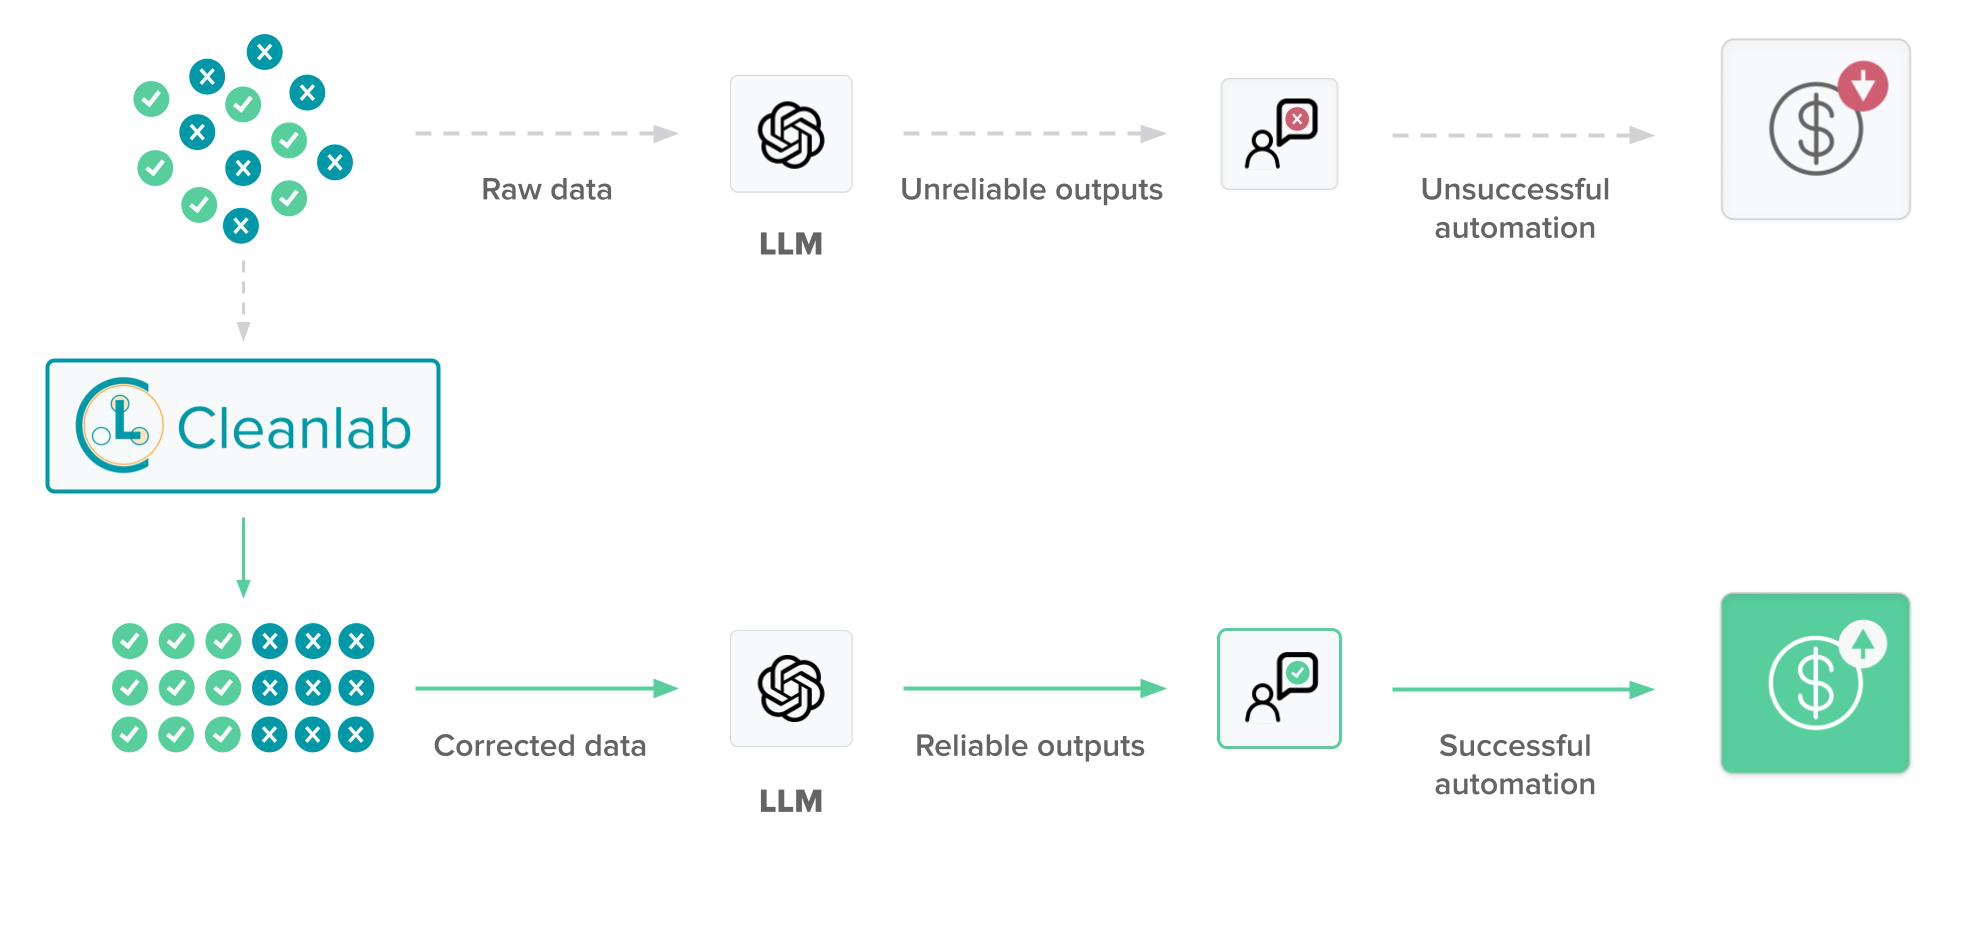 Cleanlab data curation for LLMs